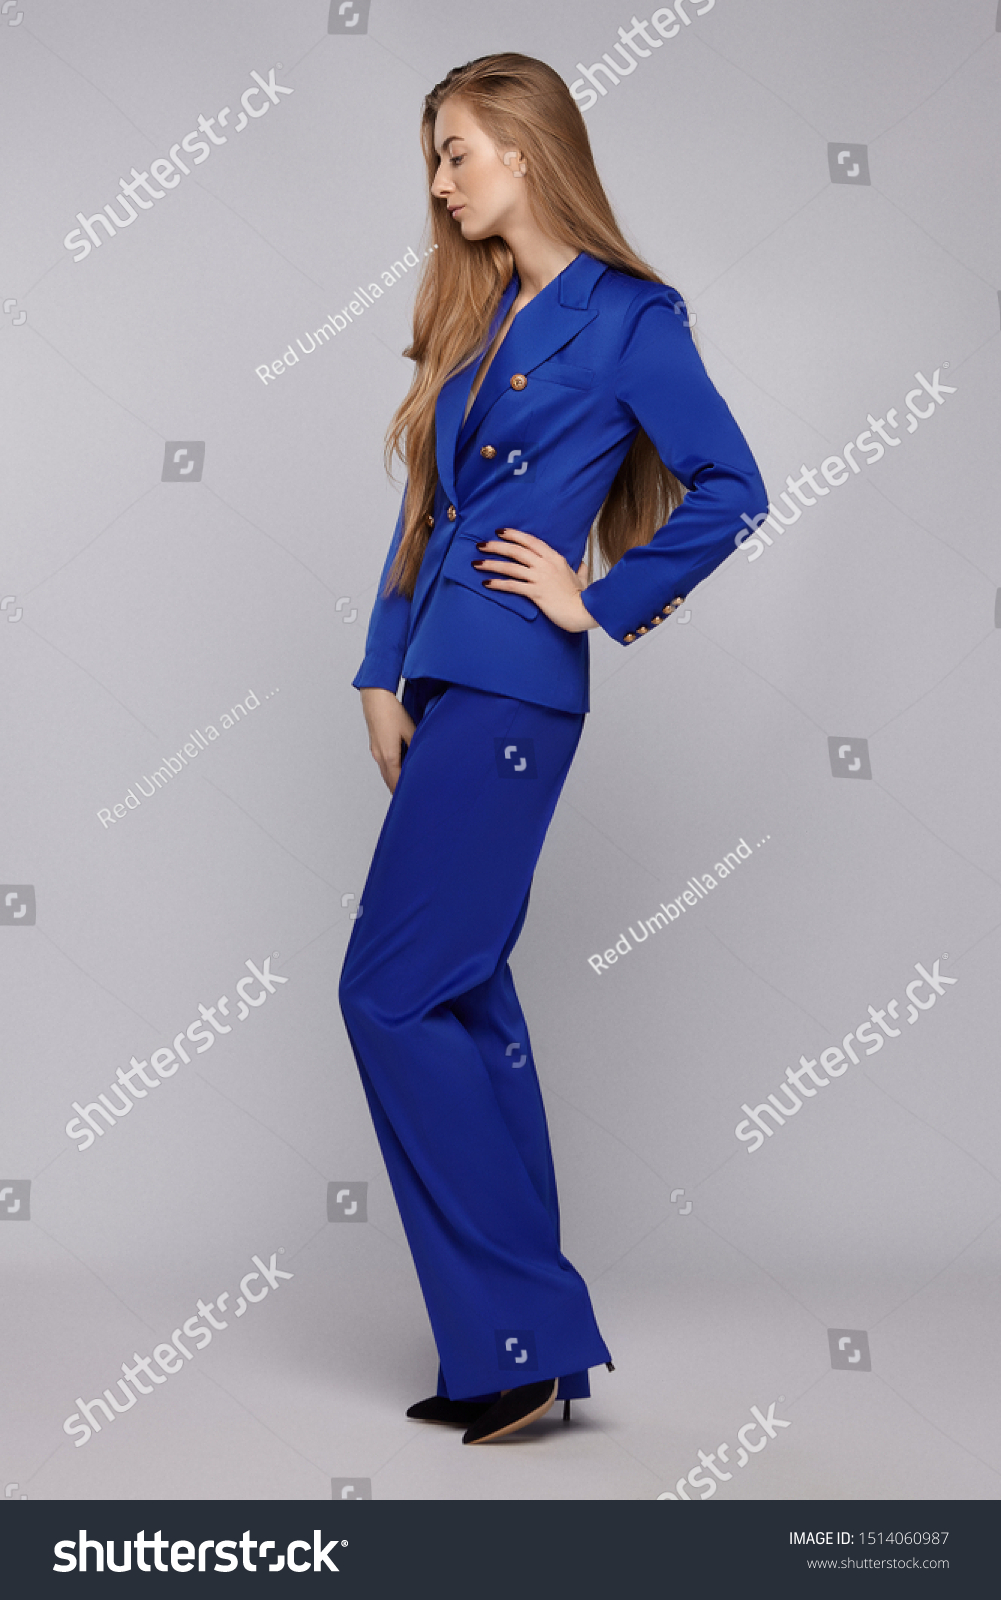 royal blue flared trousers